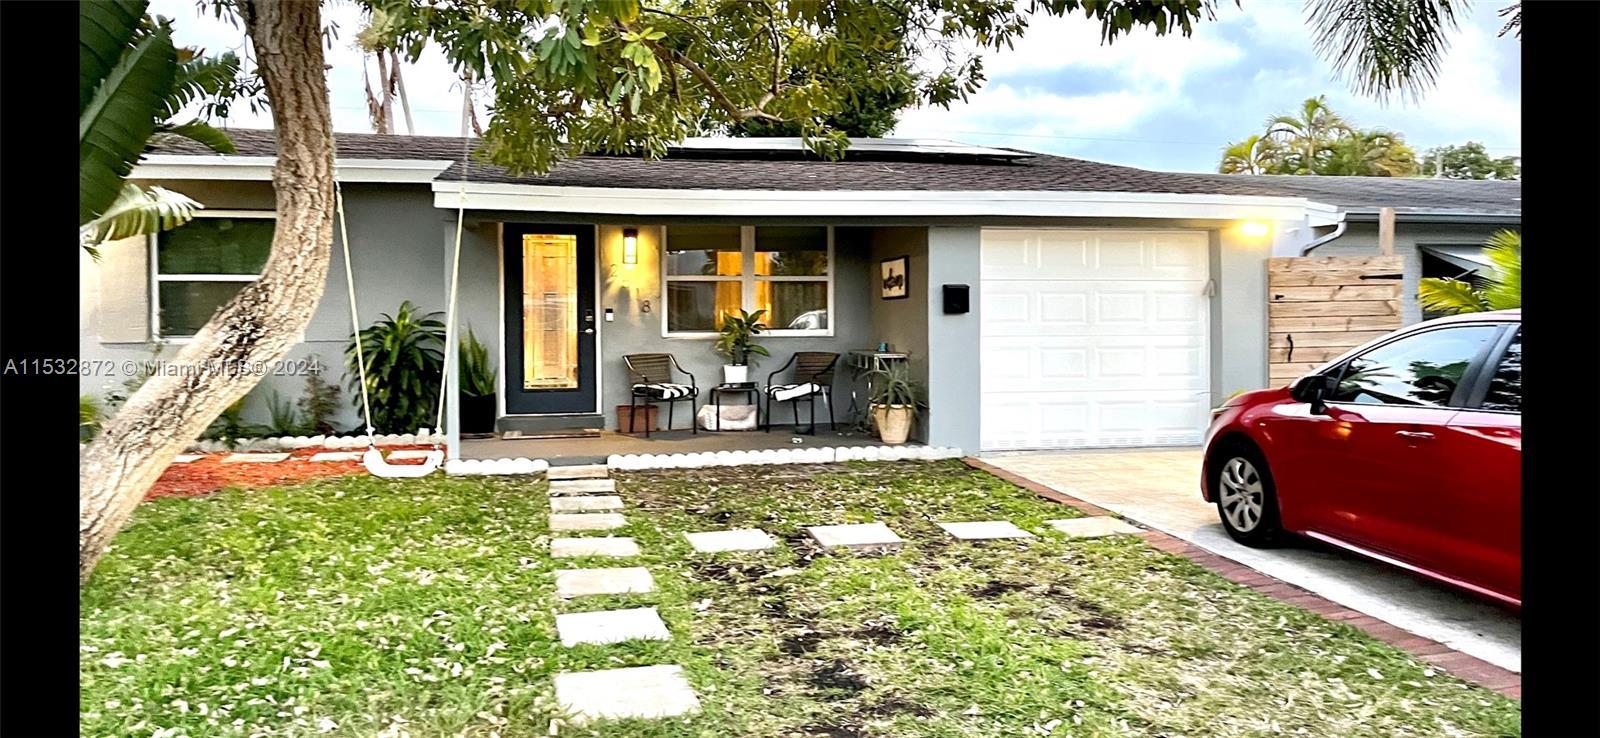 Beautiful and Cozy Remodeled Single Family Home in a Quiet Hollywood Family Neighborhood. Home featu